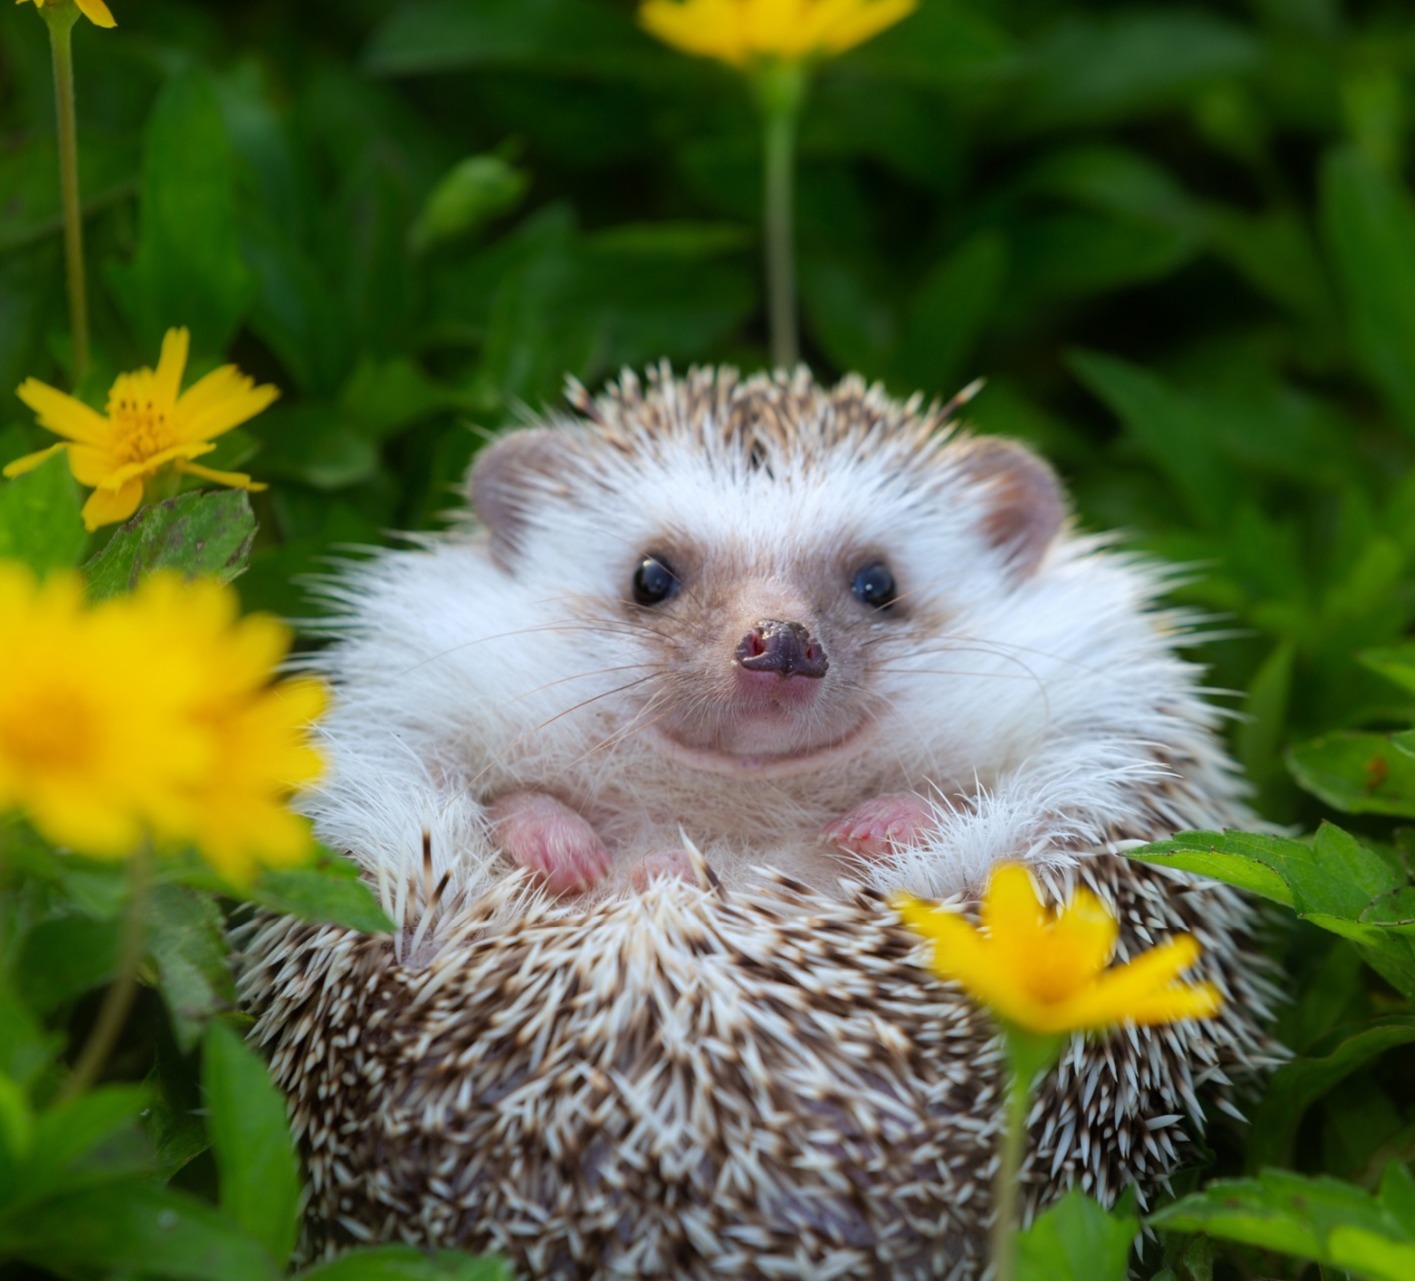 Hedgehog peaking through yellow flowers in the grass